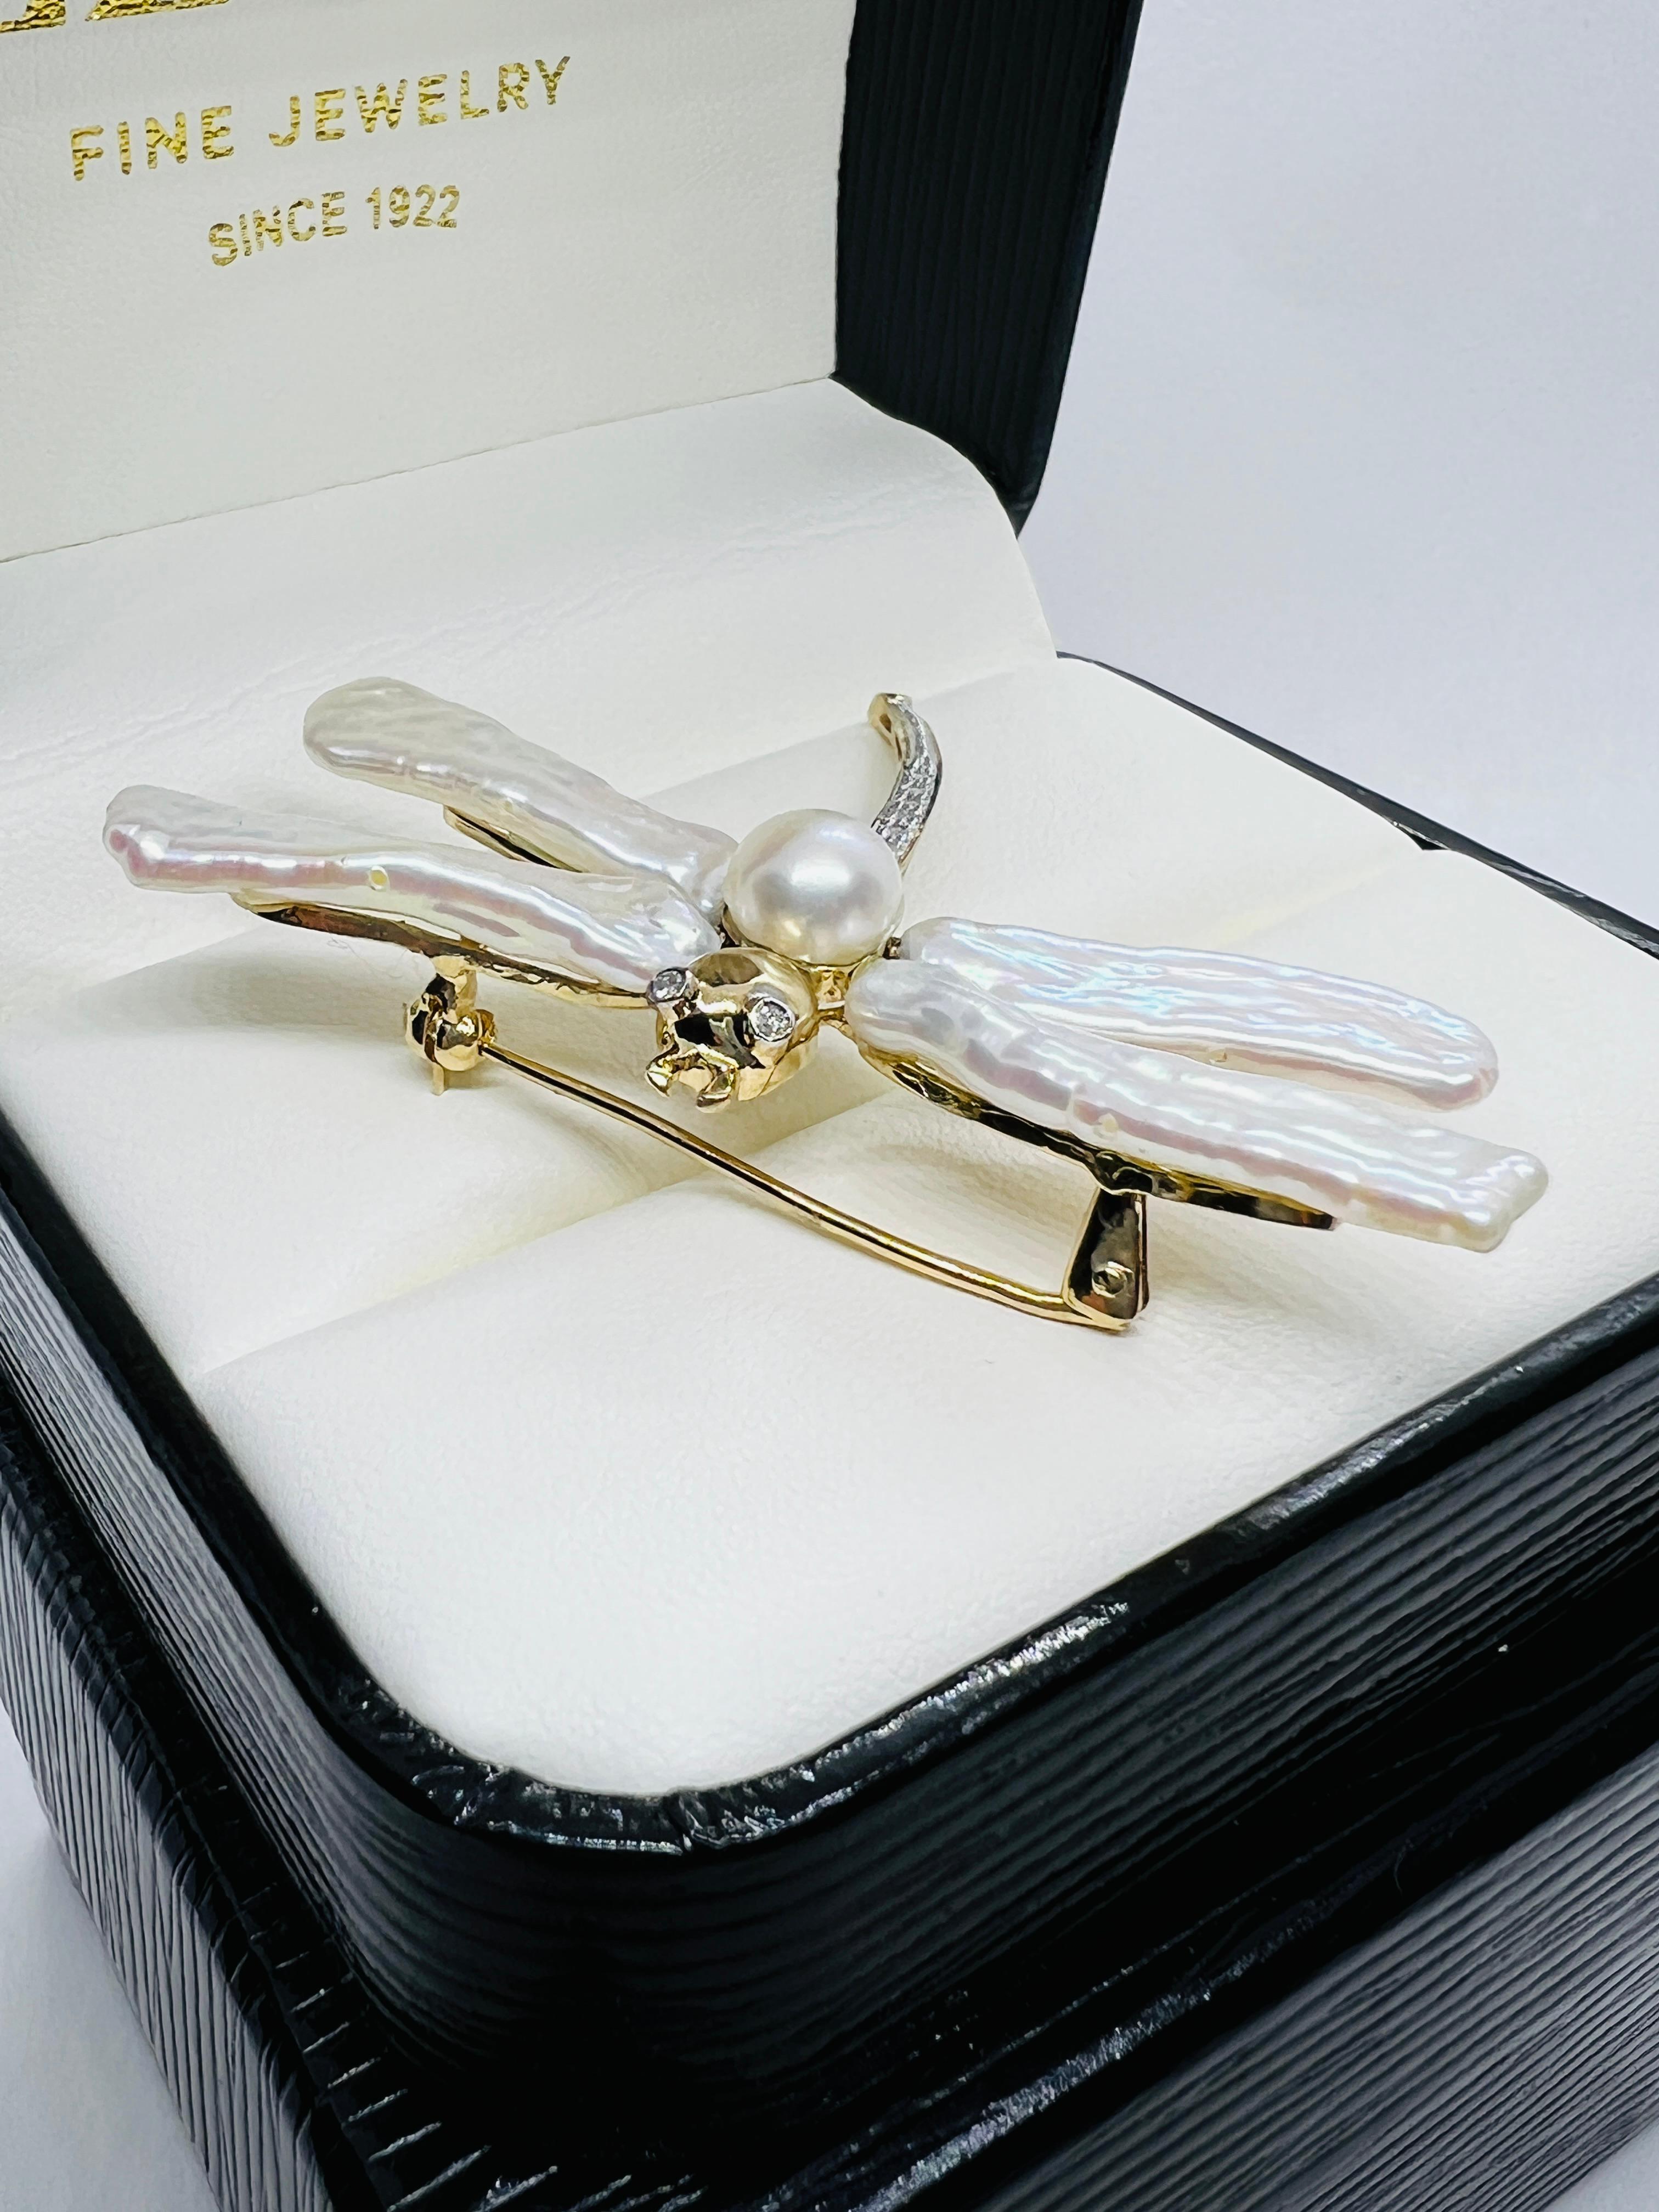 This is such a gorgeous Dragonfly Brooch! Made in 14 K Yellow Gold. The body consists of 8 round diamonds. The eyes are 2 bezel set round diamonds. The wings are Biwa pearls and there is a single 7mm pearl at the center of the wings. It measures